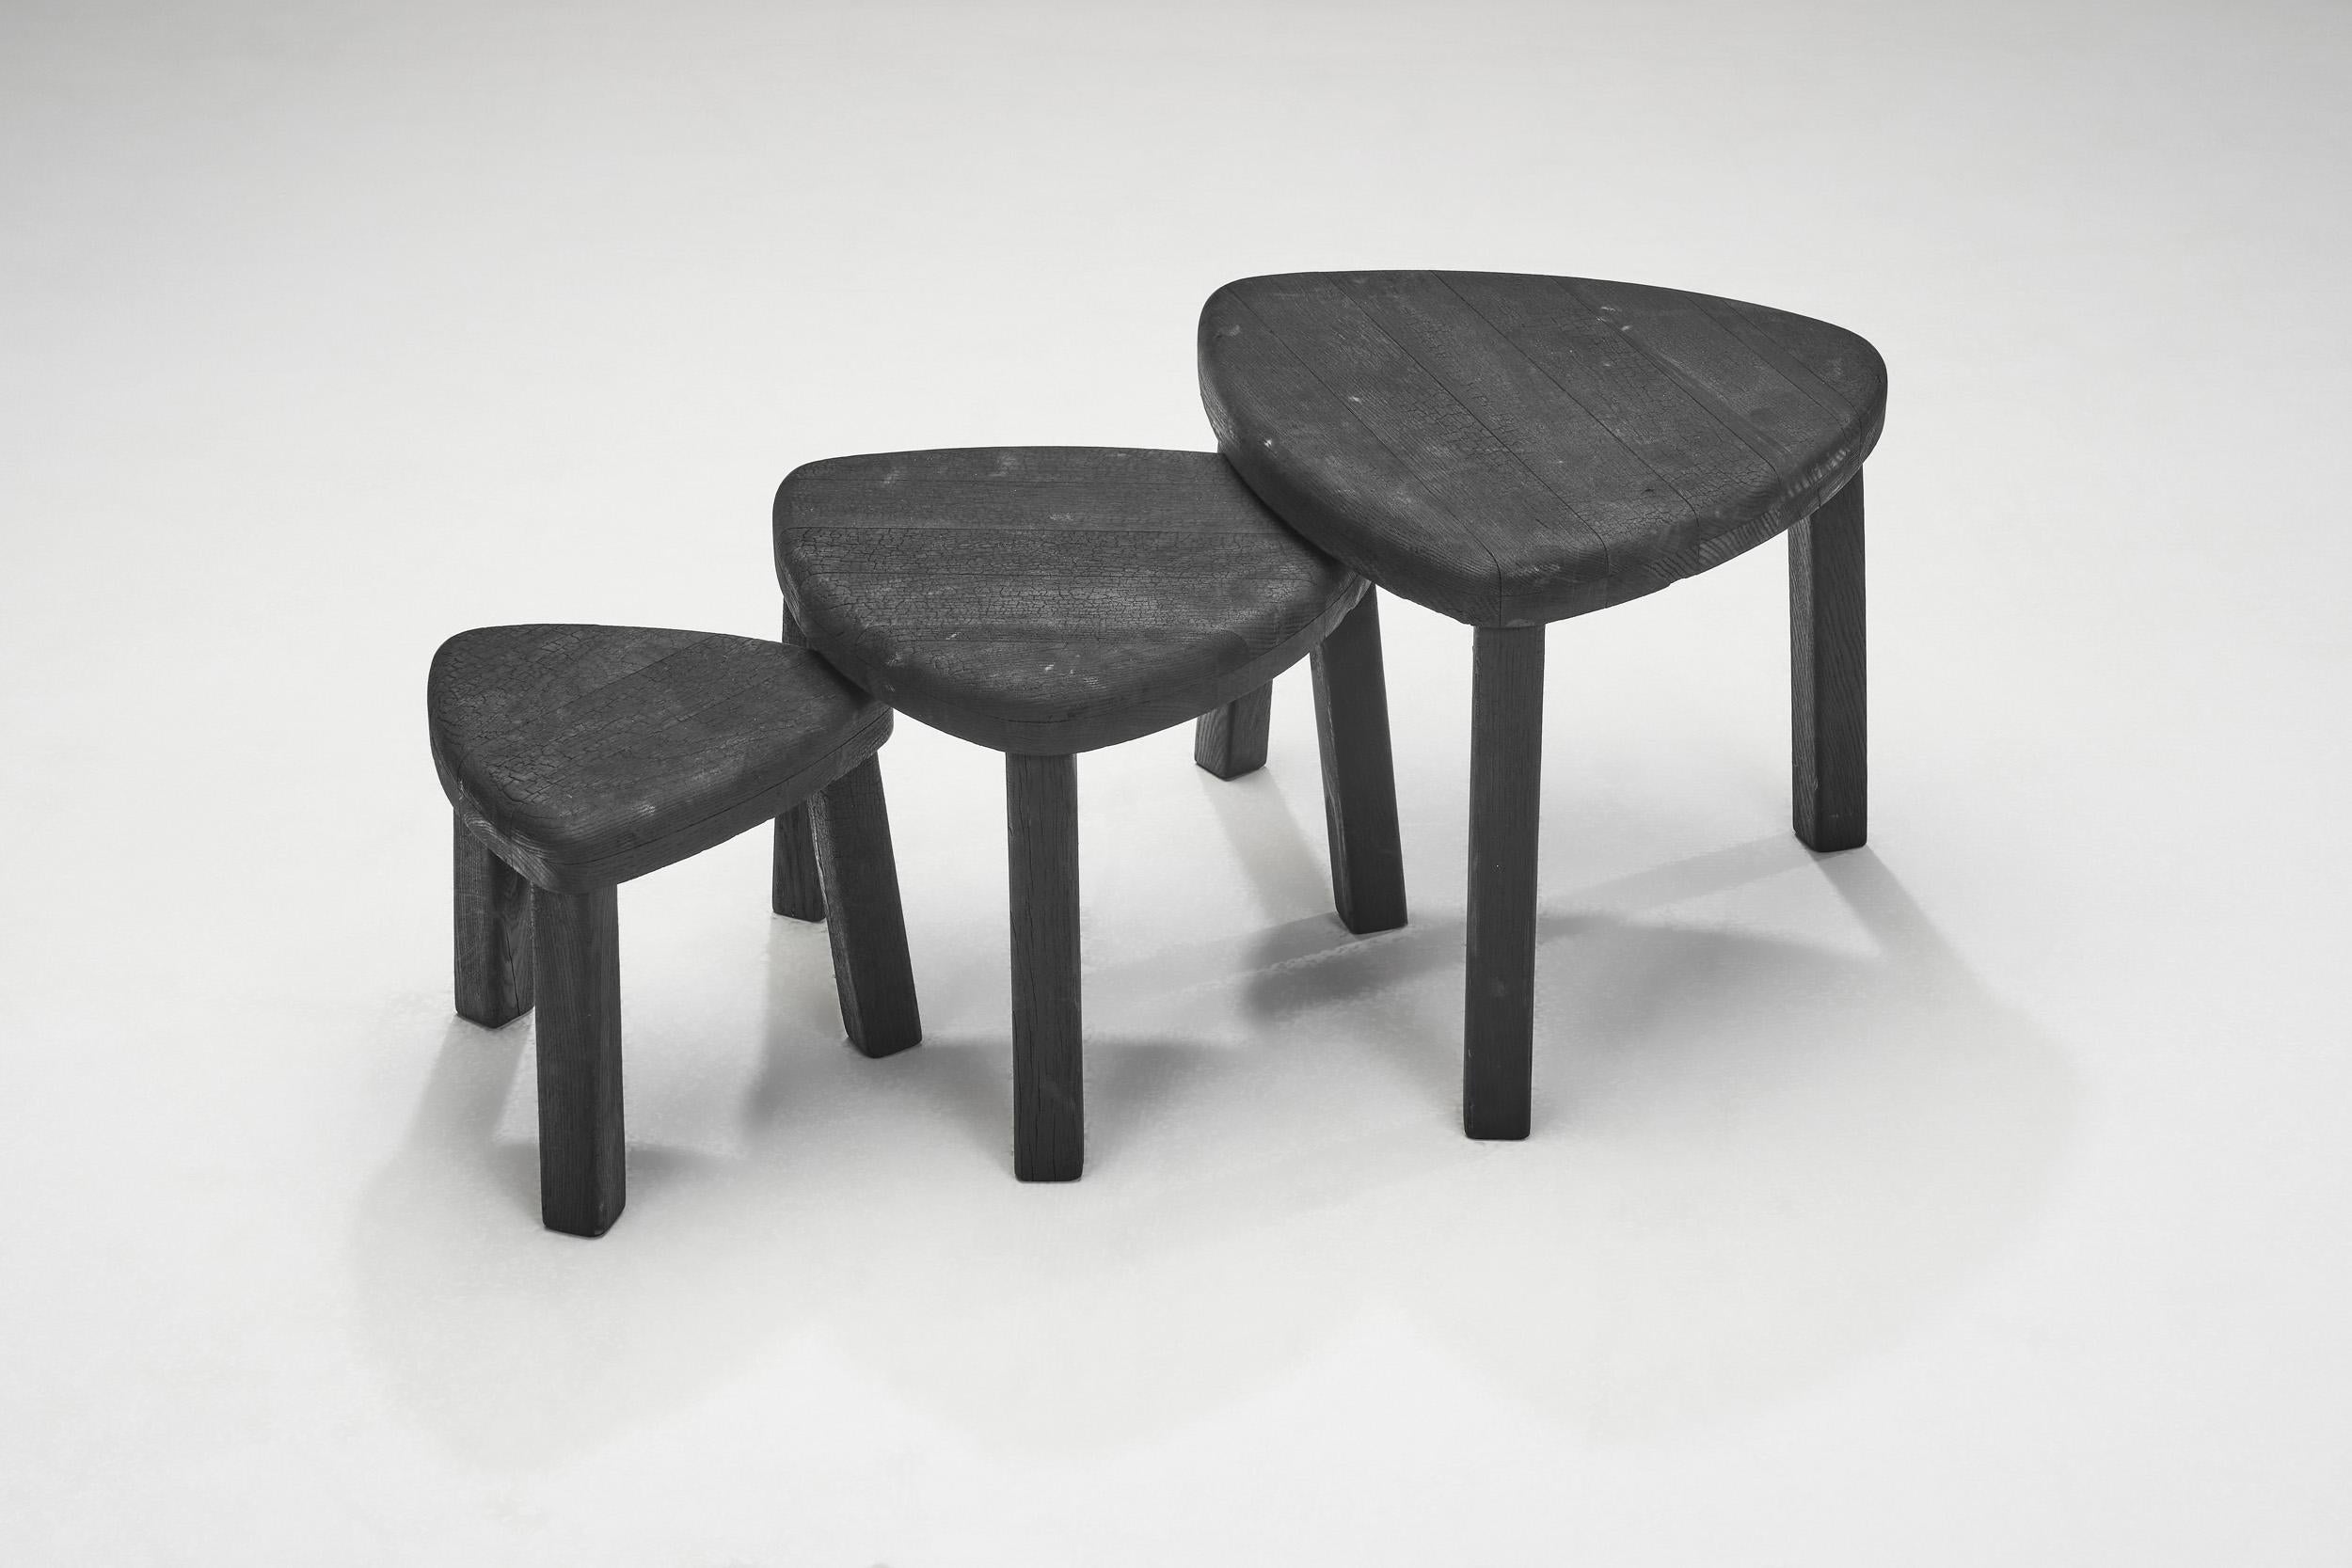 Wood Charred Triangular Nesting Tables, Europe ca 1970s For Sale